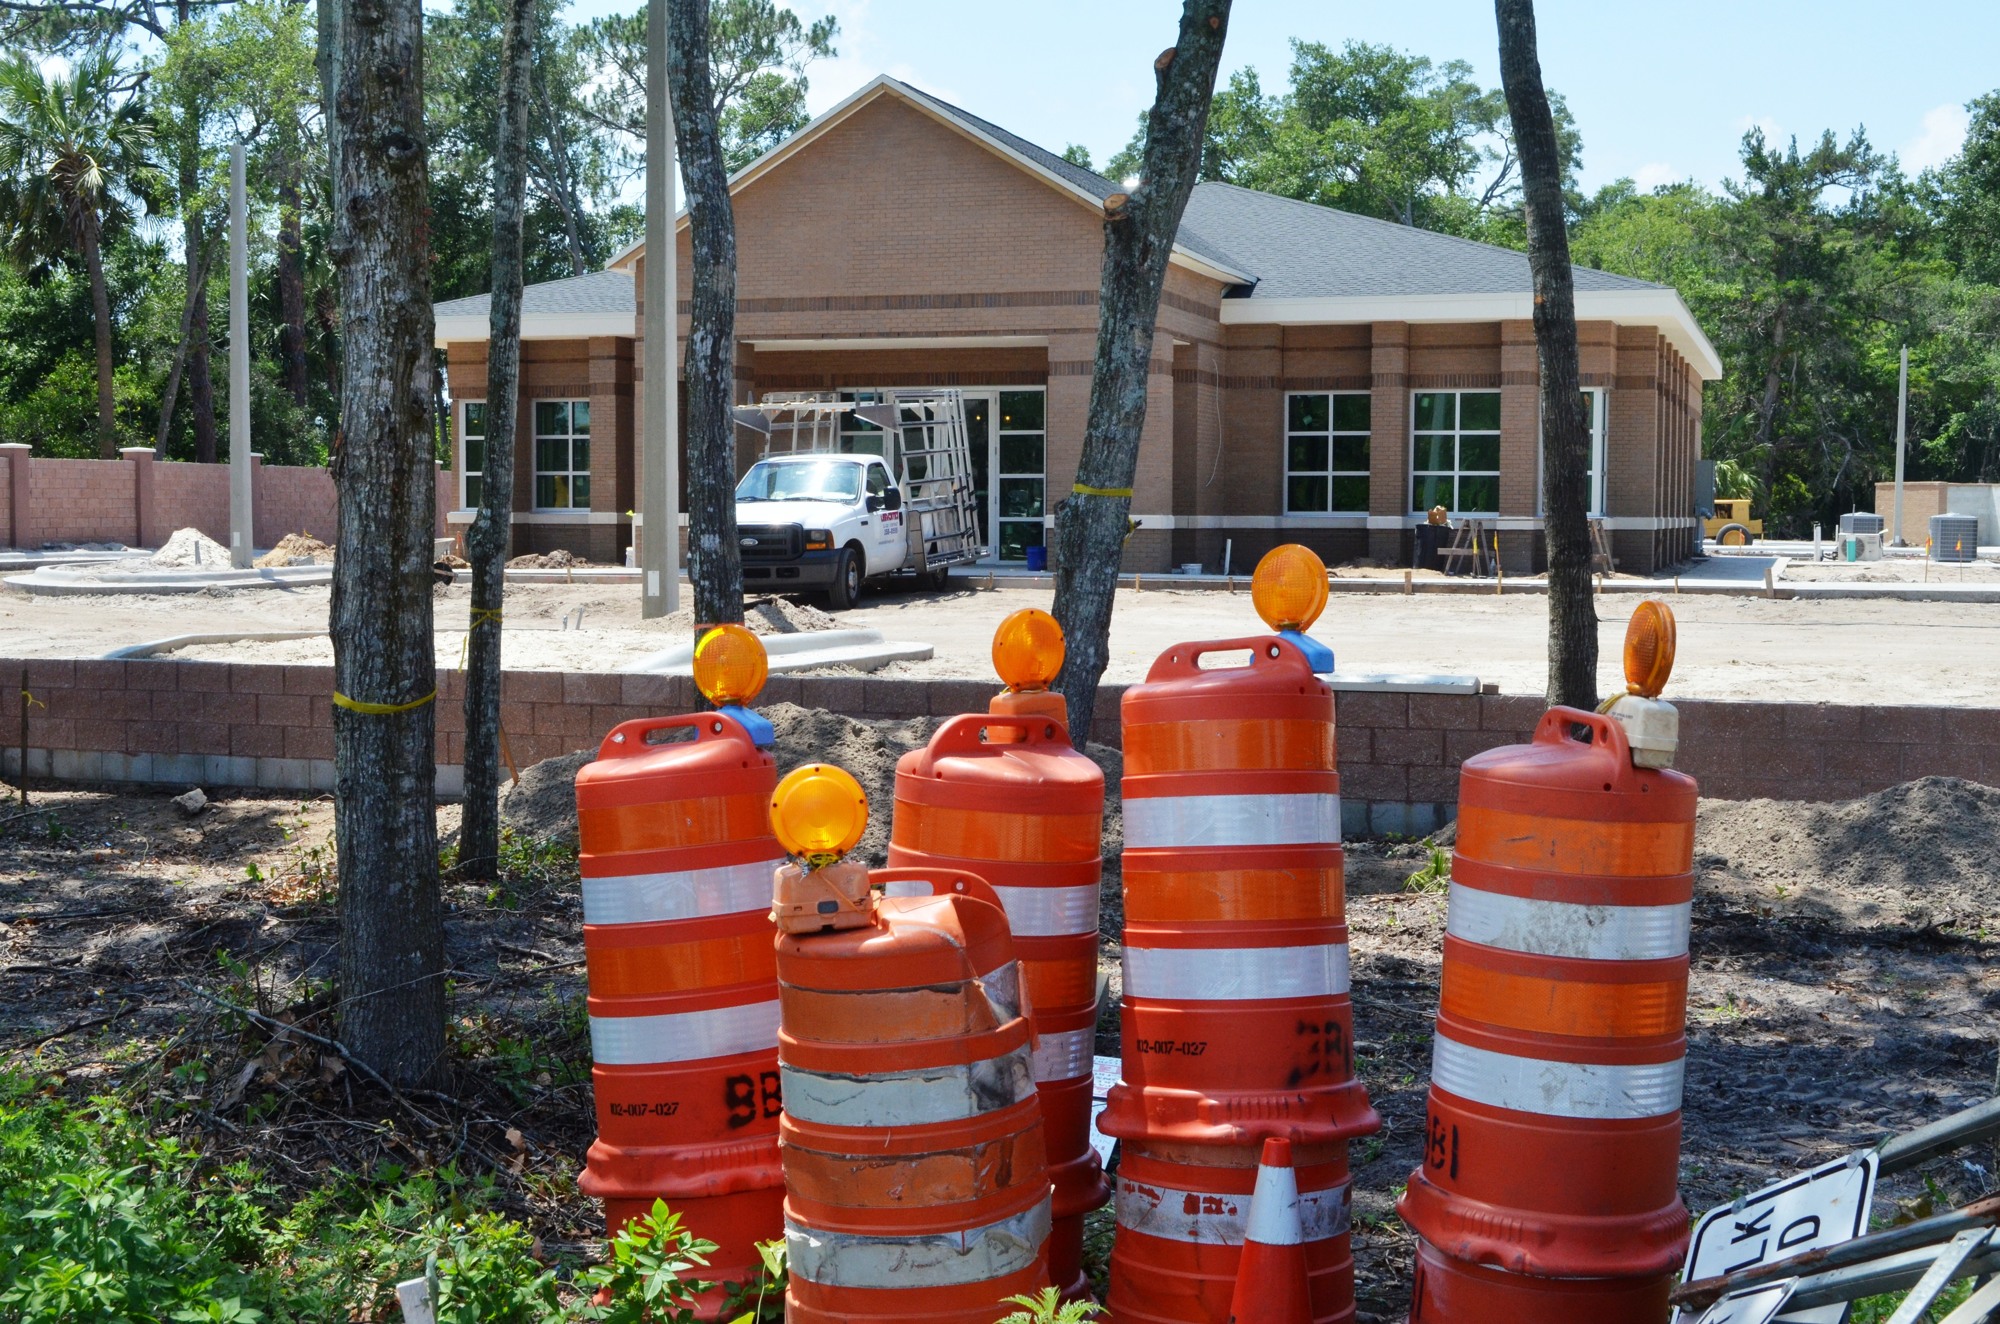 The Vystar Credit Union is expected to open by September.